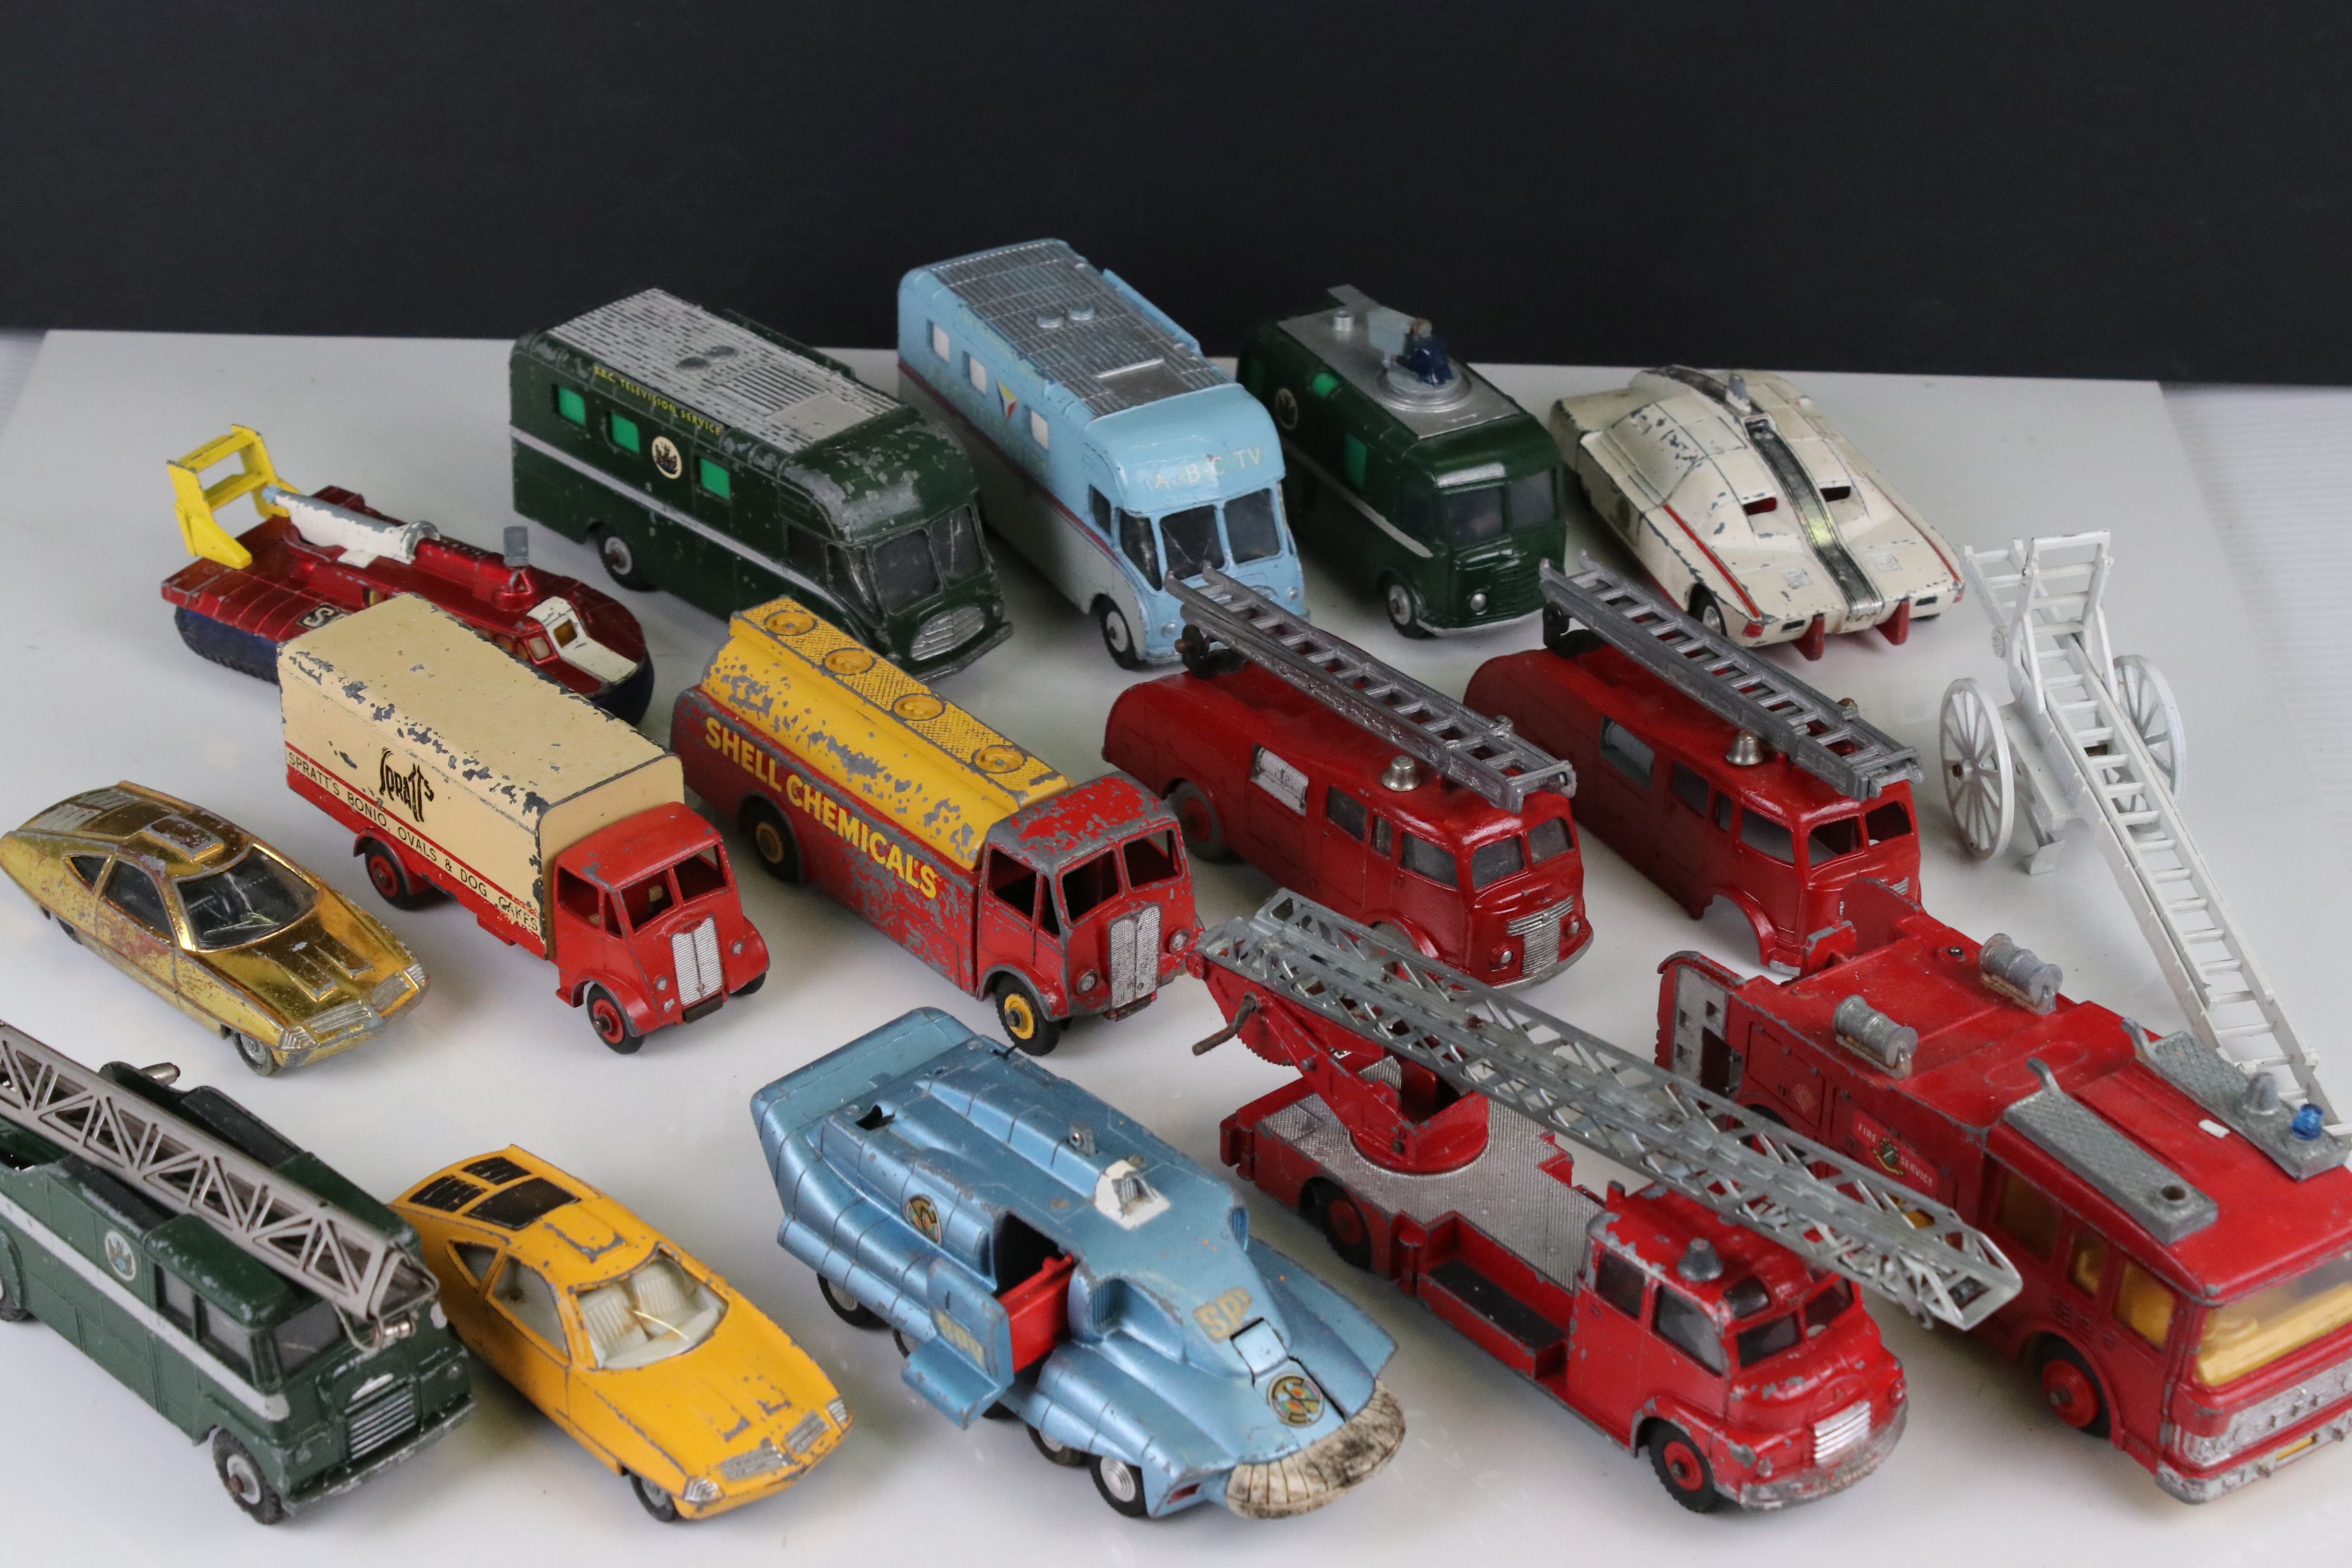 15 play worn mid 20th diecast models to include TV Mobile Control Room, 967 BBC TV Mobile Control